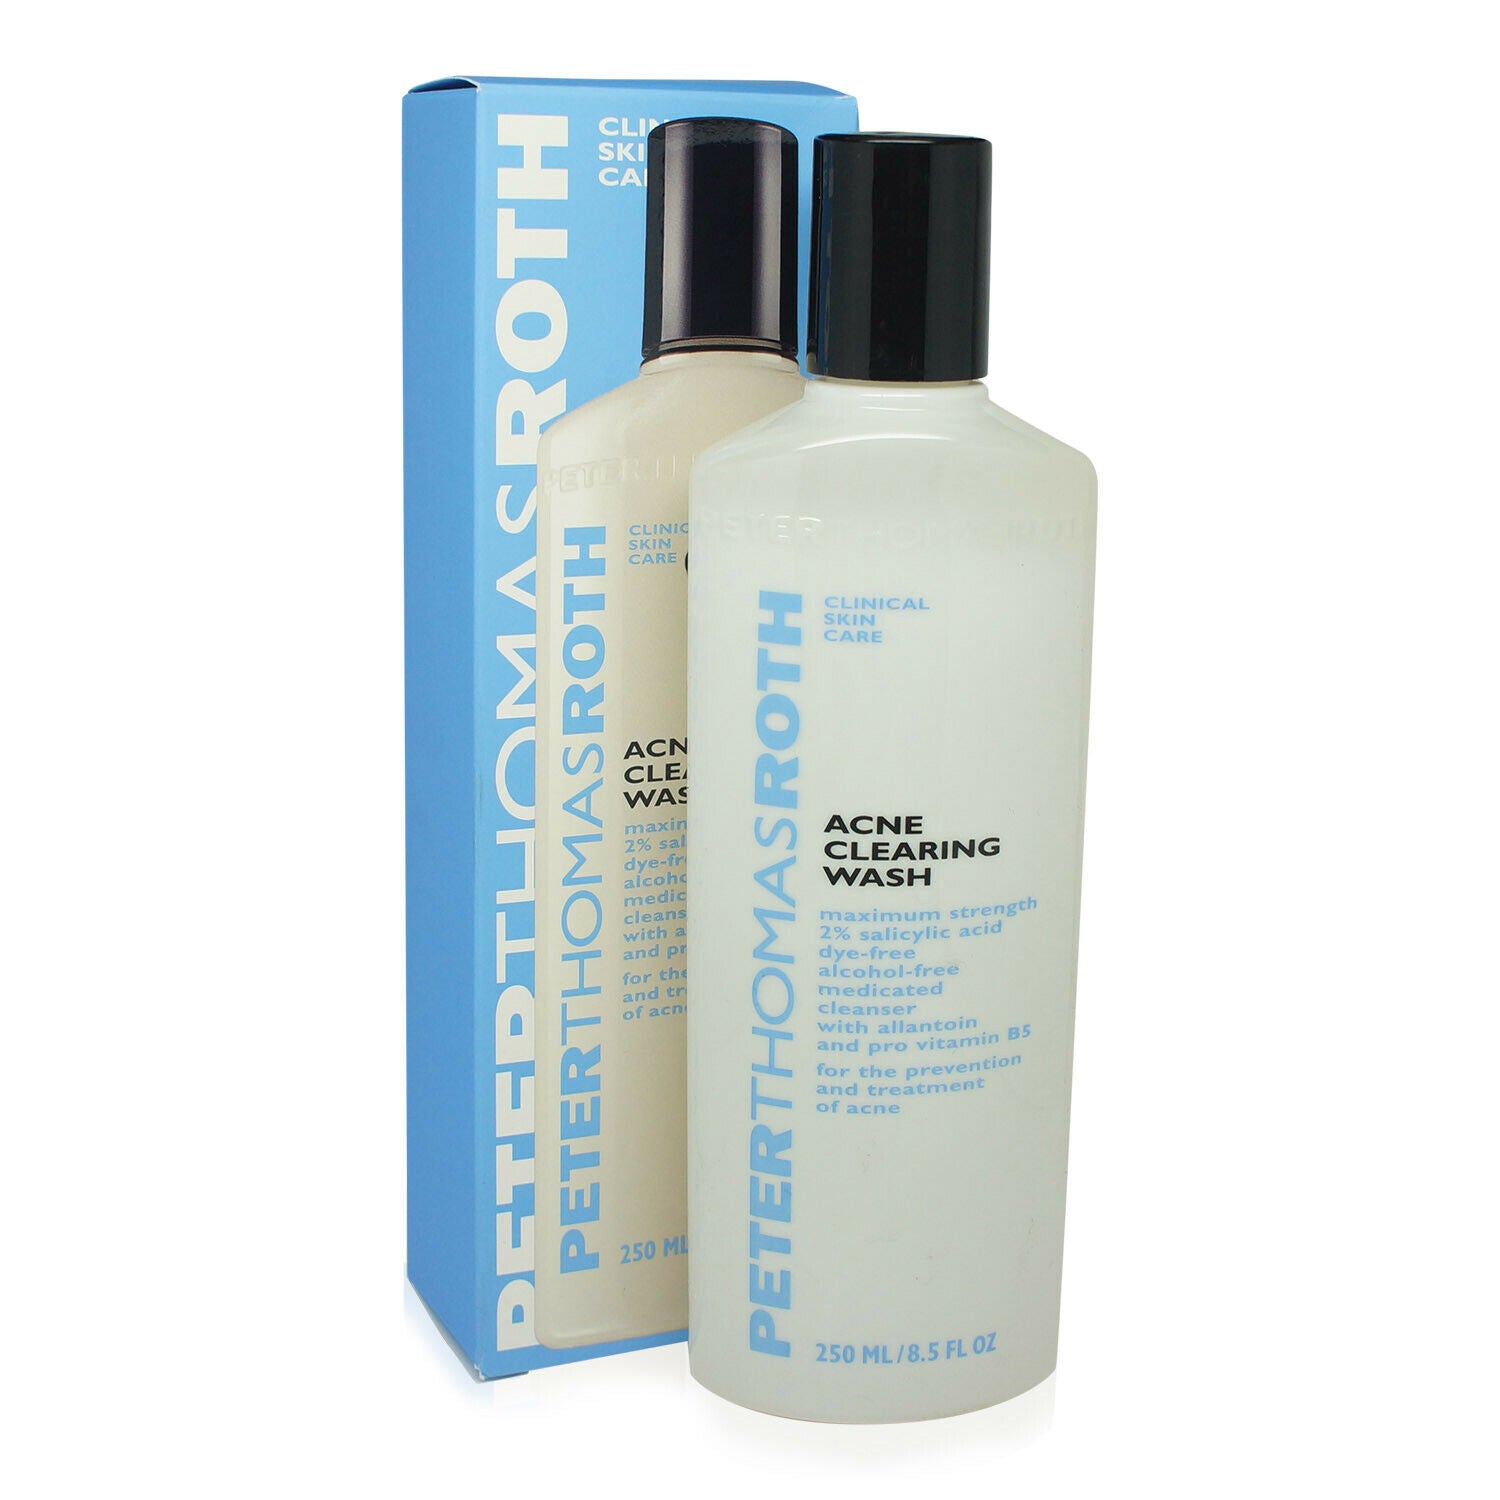 Peter Thomas Roth Acne Clearing Wash 8.5 oz.